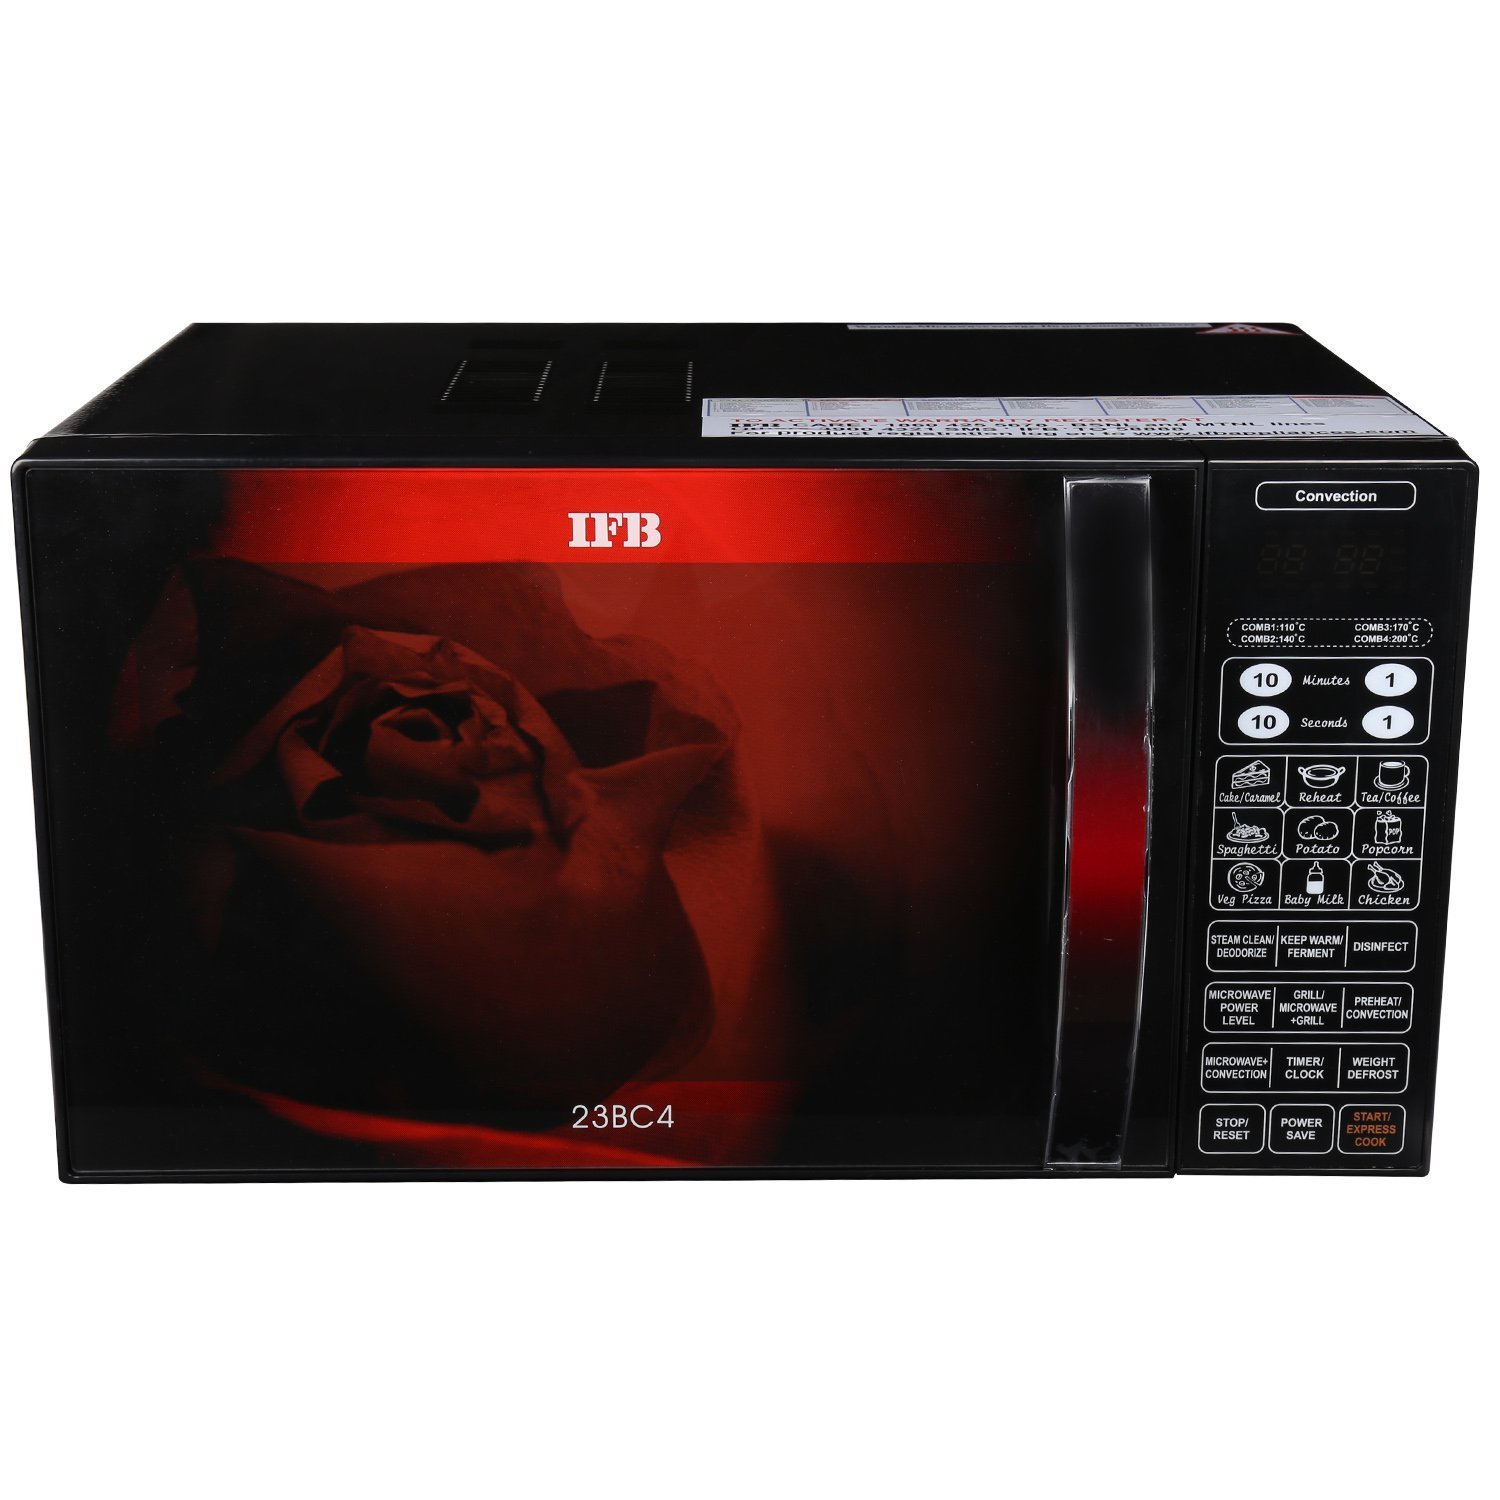 Top 7 convection microwave ovens below 15000 - HungryForever Food Blog